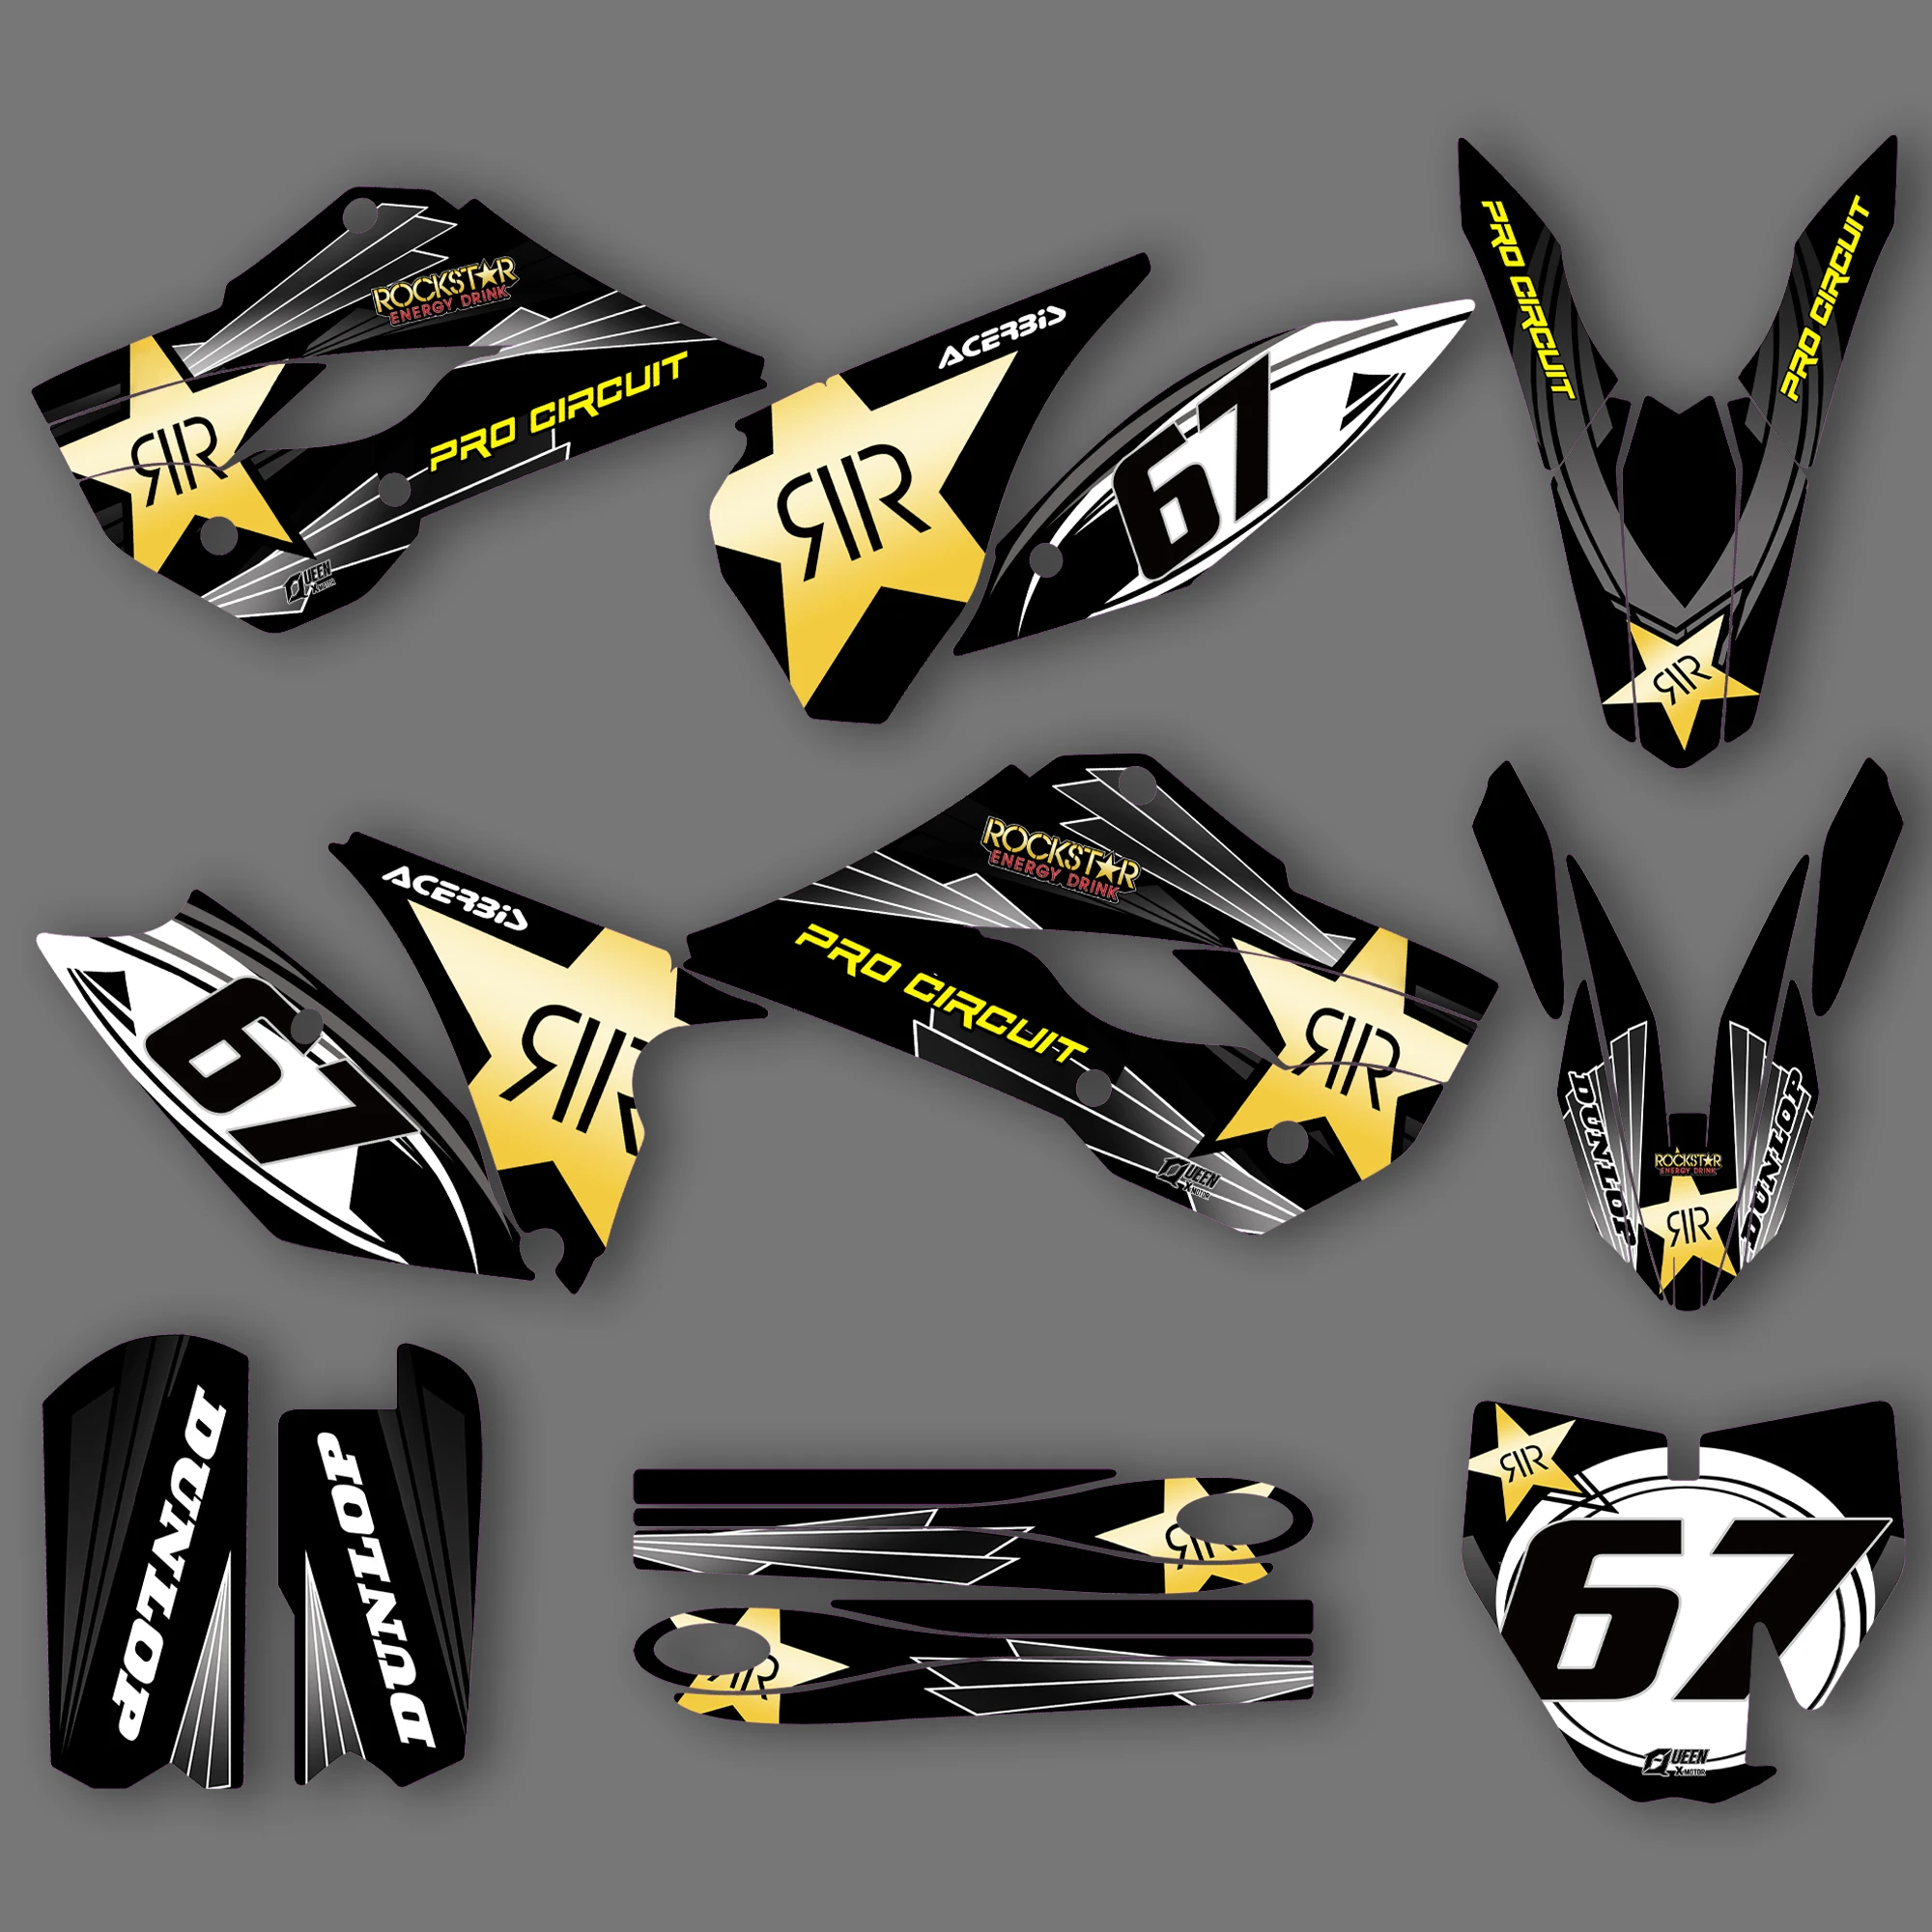  team queen x motor graphics background decal sticker kits fit for husqvarna tc 85 2014 thumb200